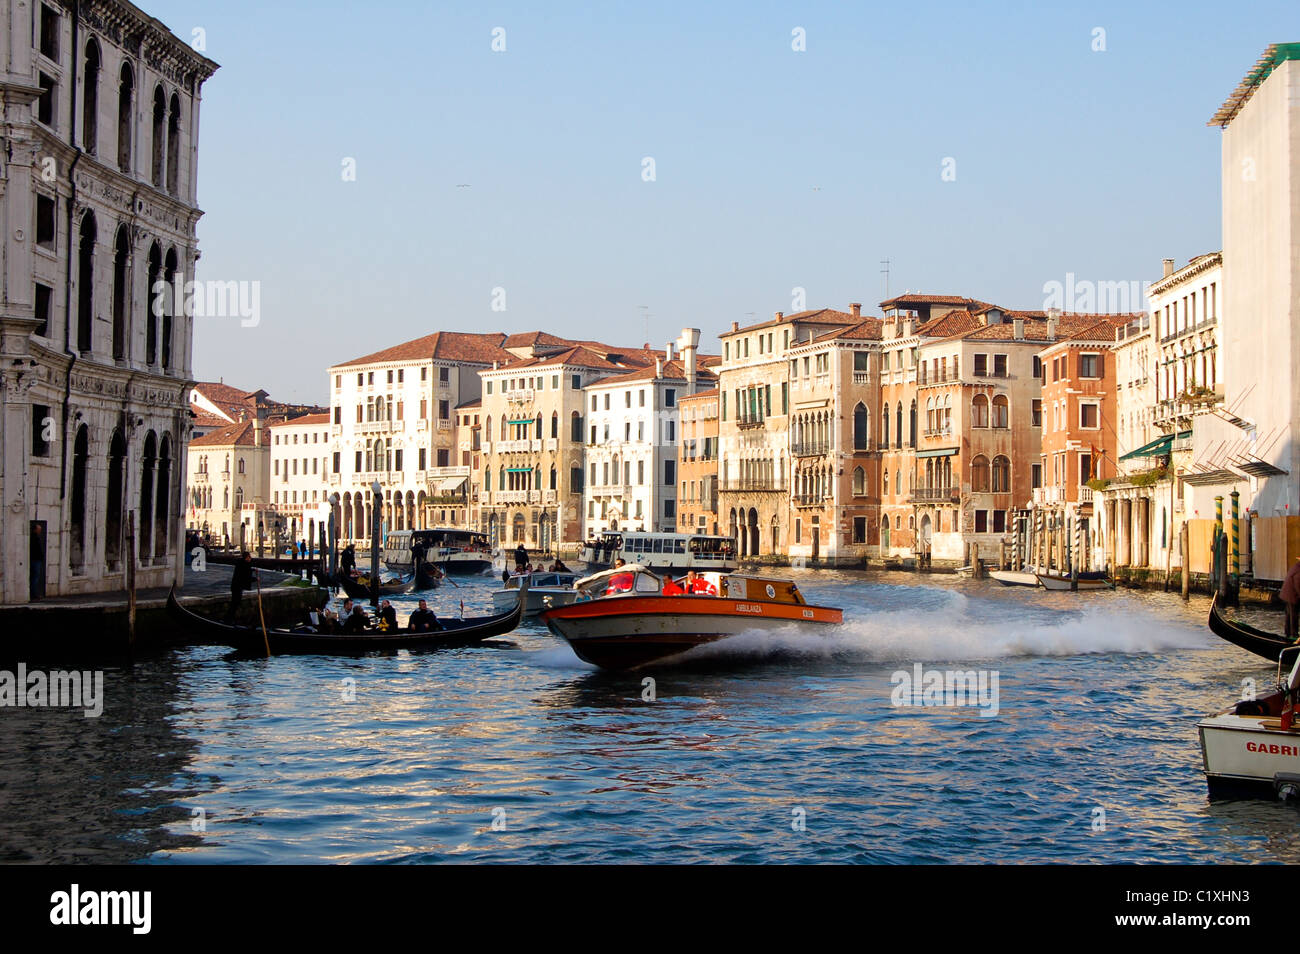 Water ambulance speeds down a canal, in warm near sunset light, Venice, Italy Stock Photo